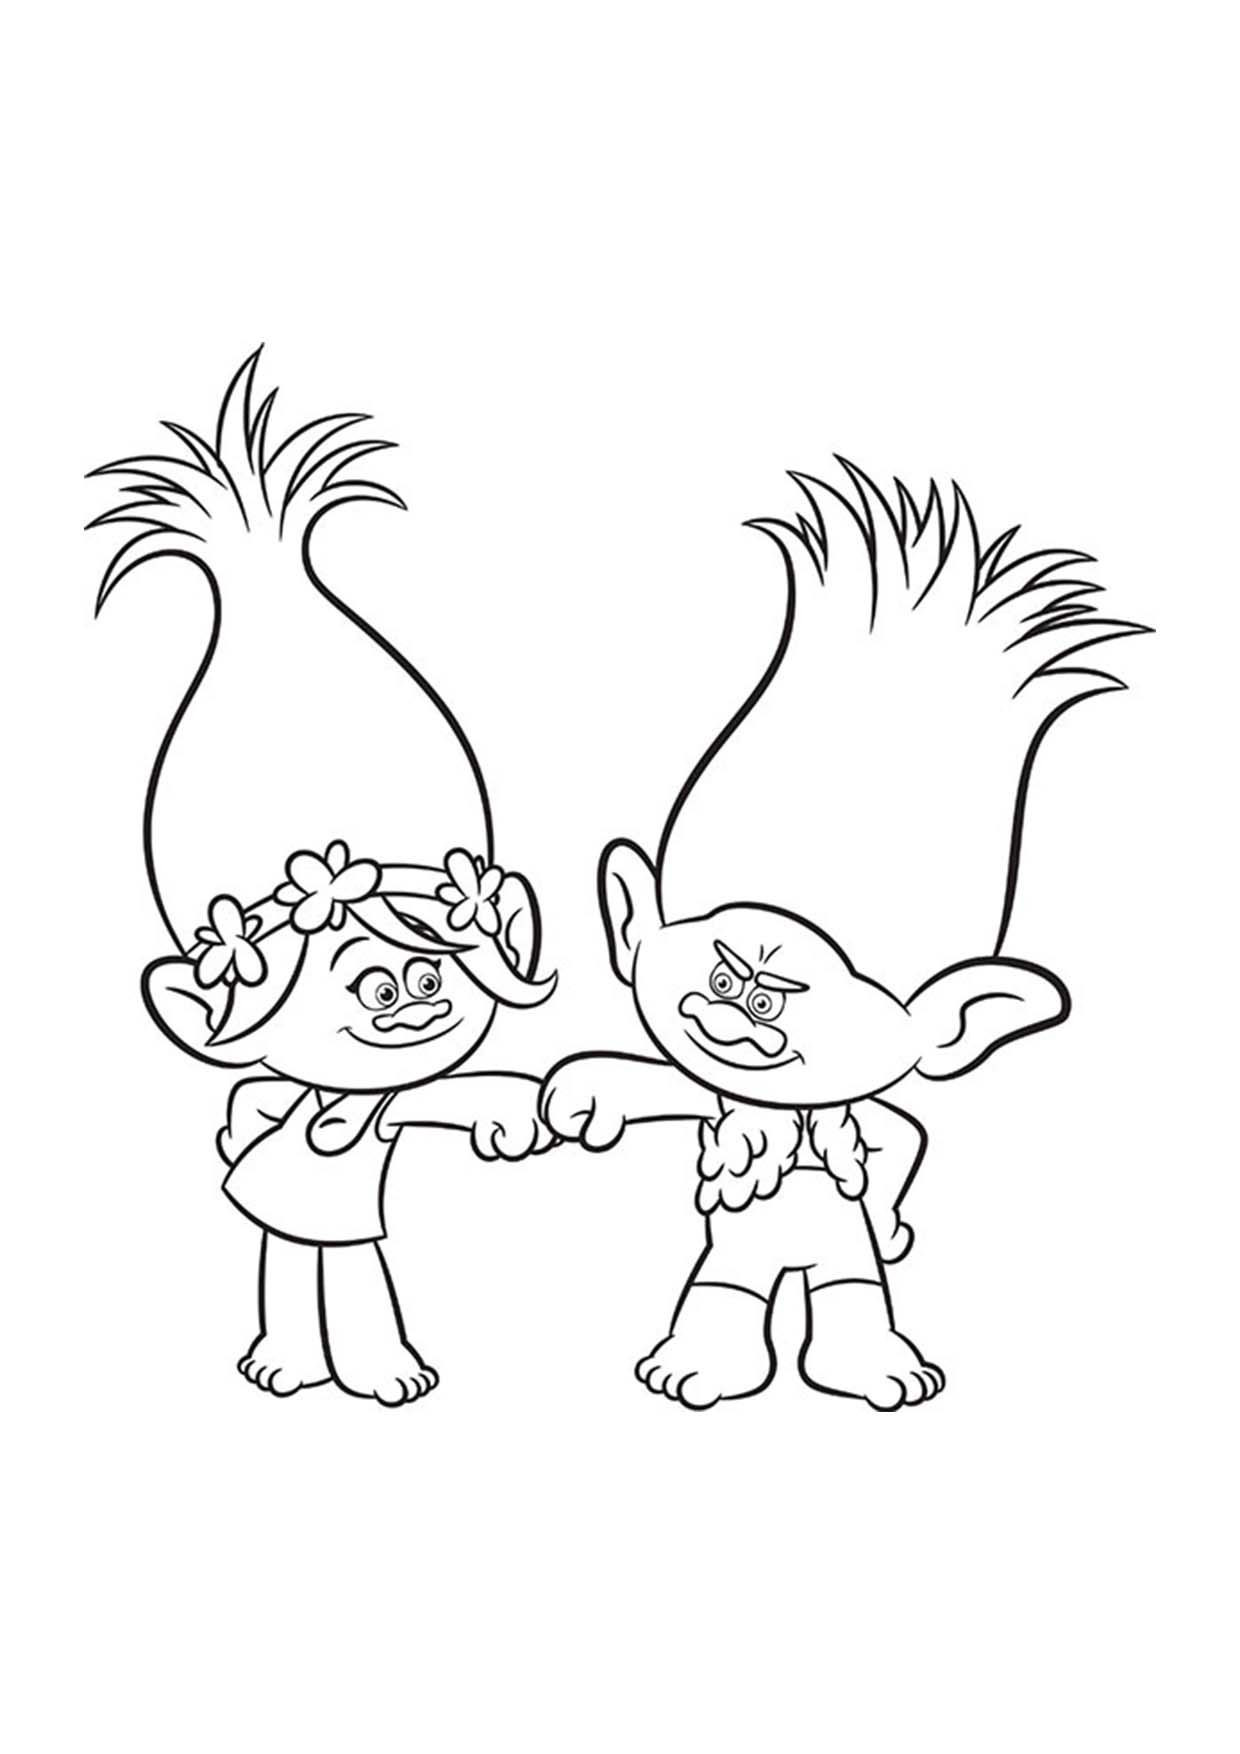 Trolls Printable Coloring Pages
 Trolls Coloring pages to and print for free